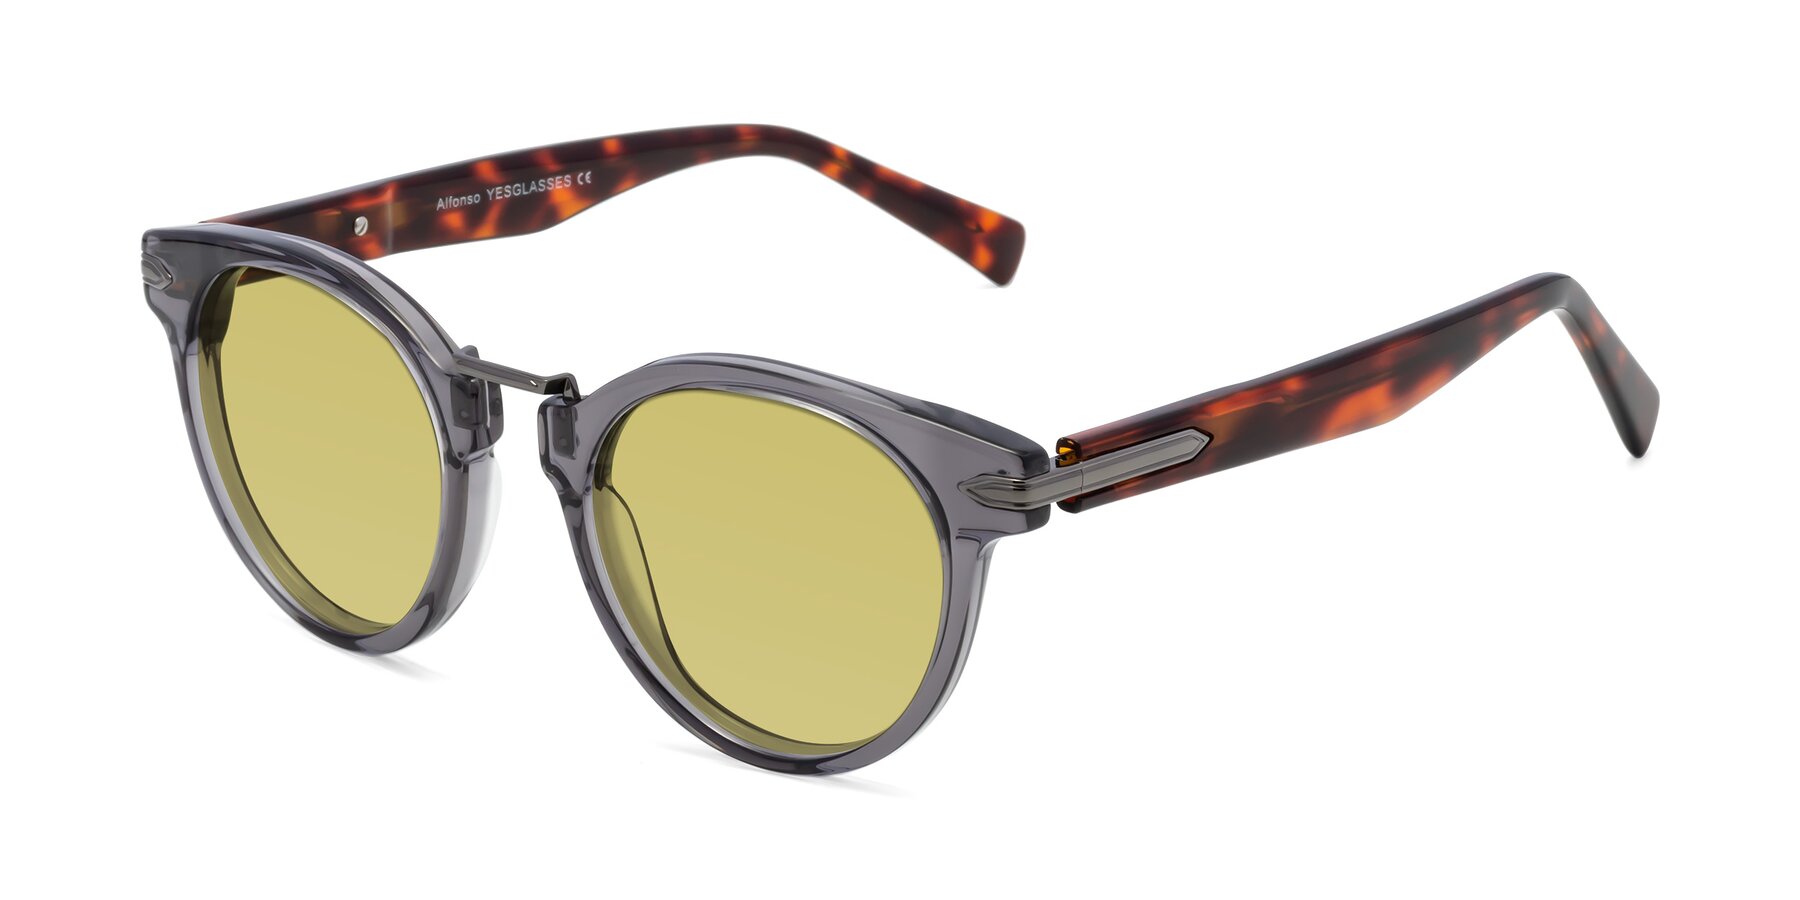 Angle of Alfonso in Gray /Tortoise with Medium Champagne Tinted Lenses